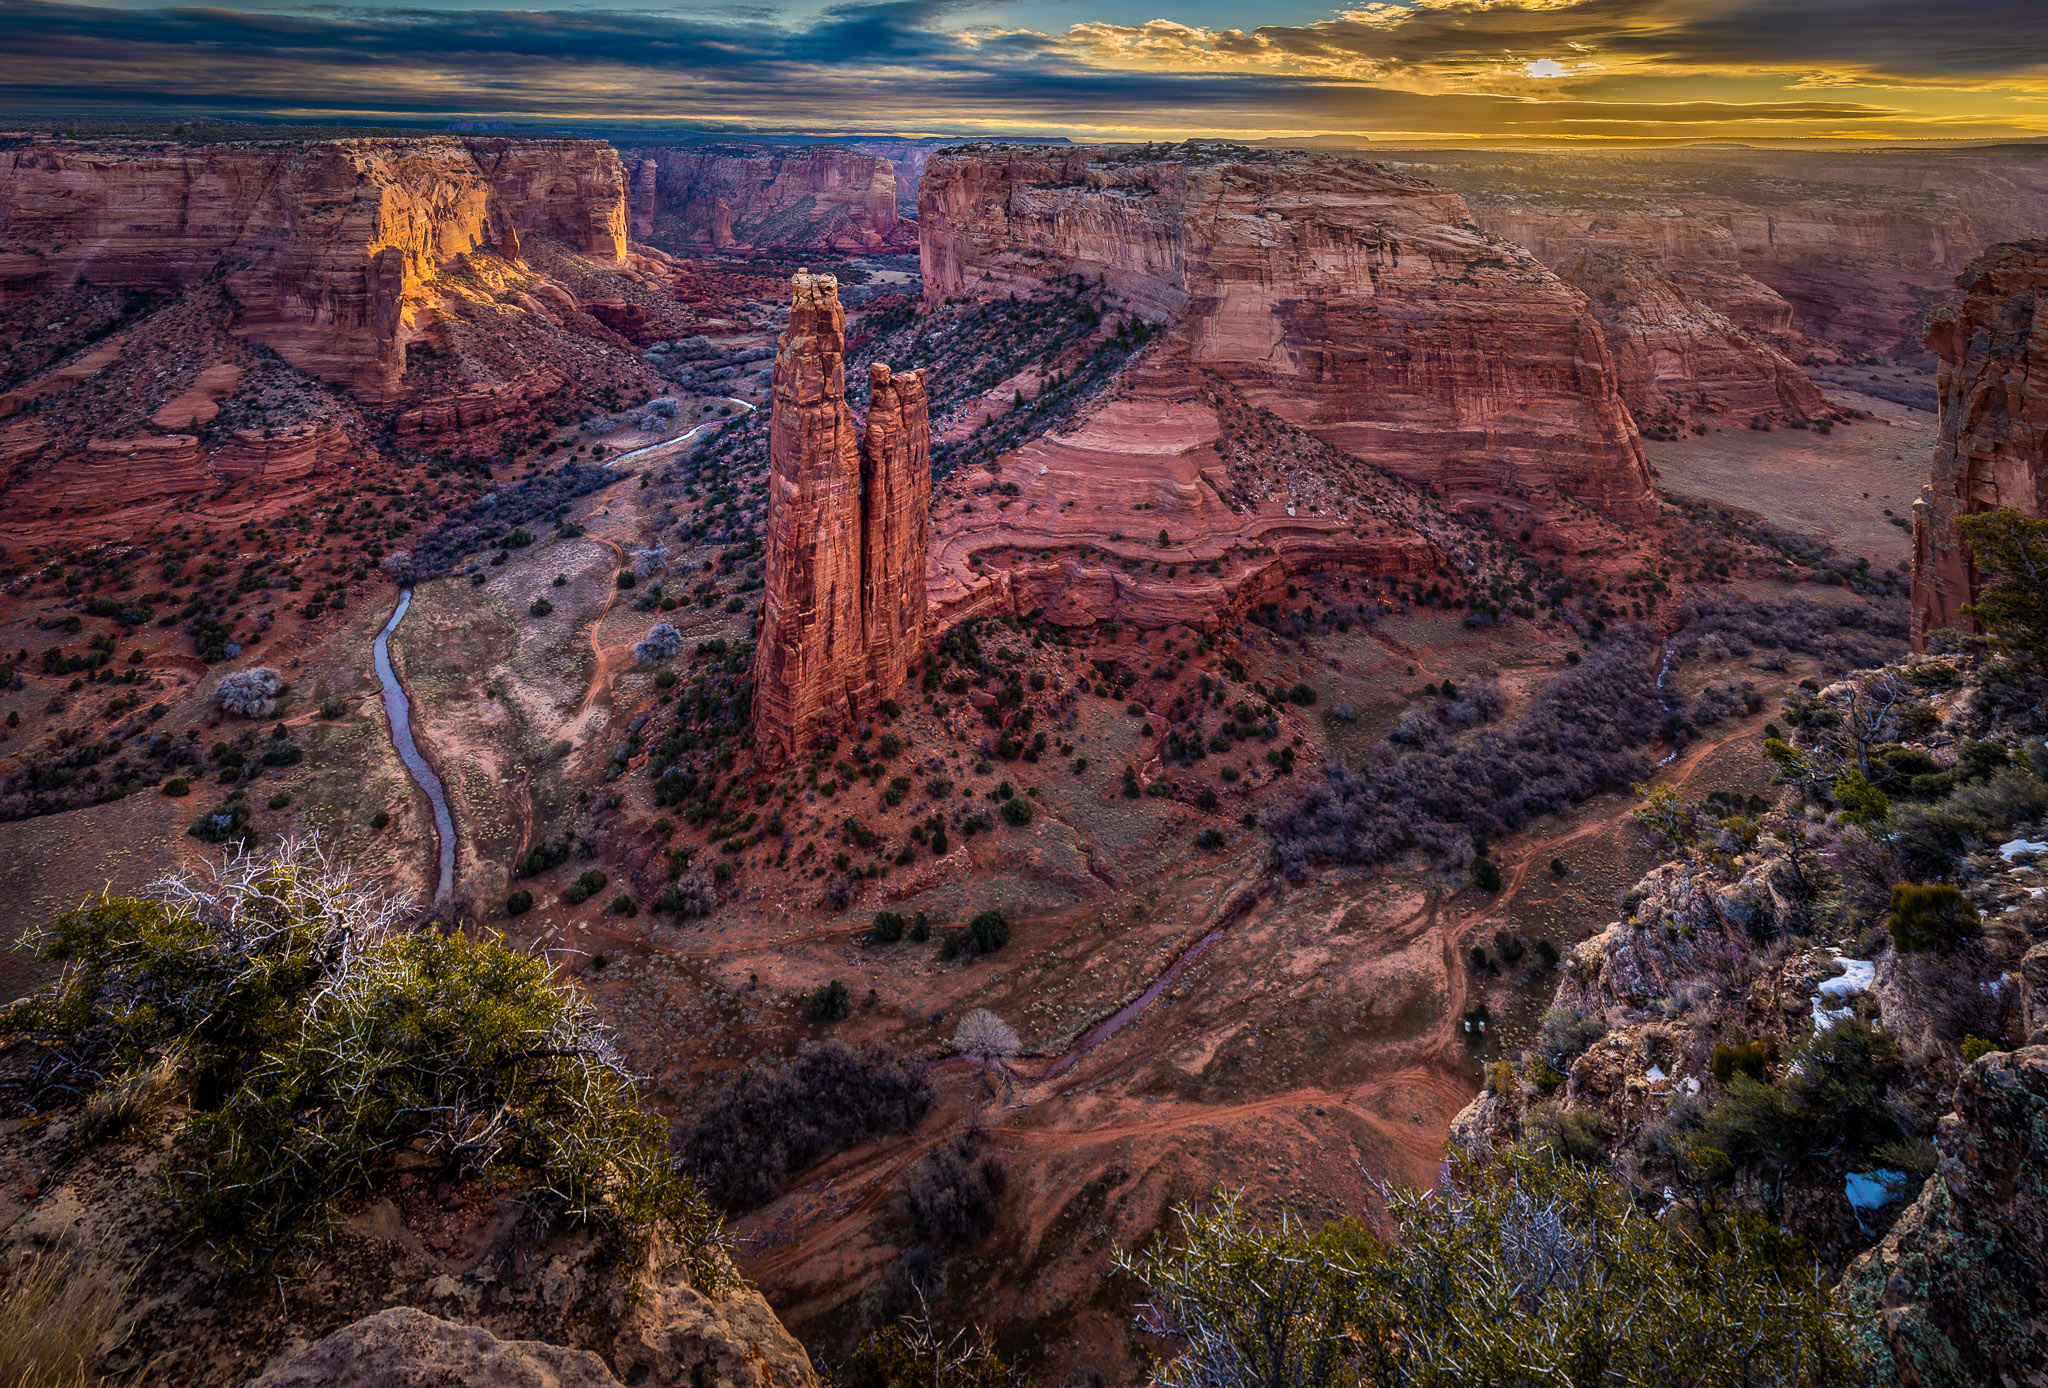 Canyon de Chelley sunrise from Spider Rock Viewpoint, Arizona